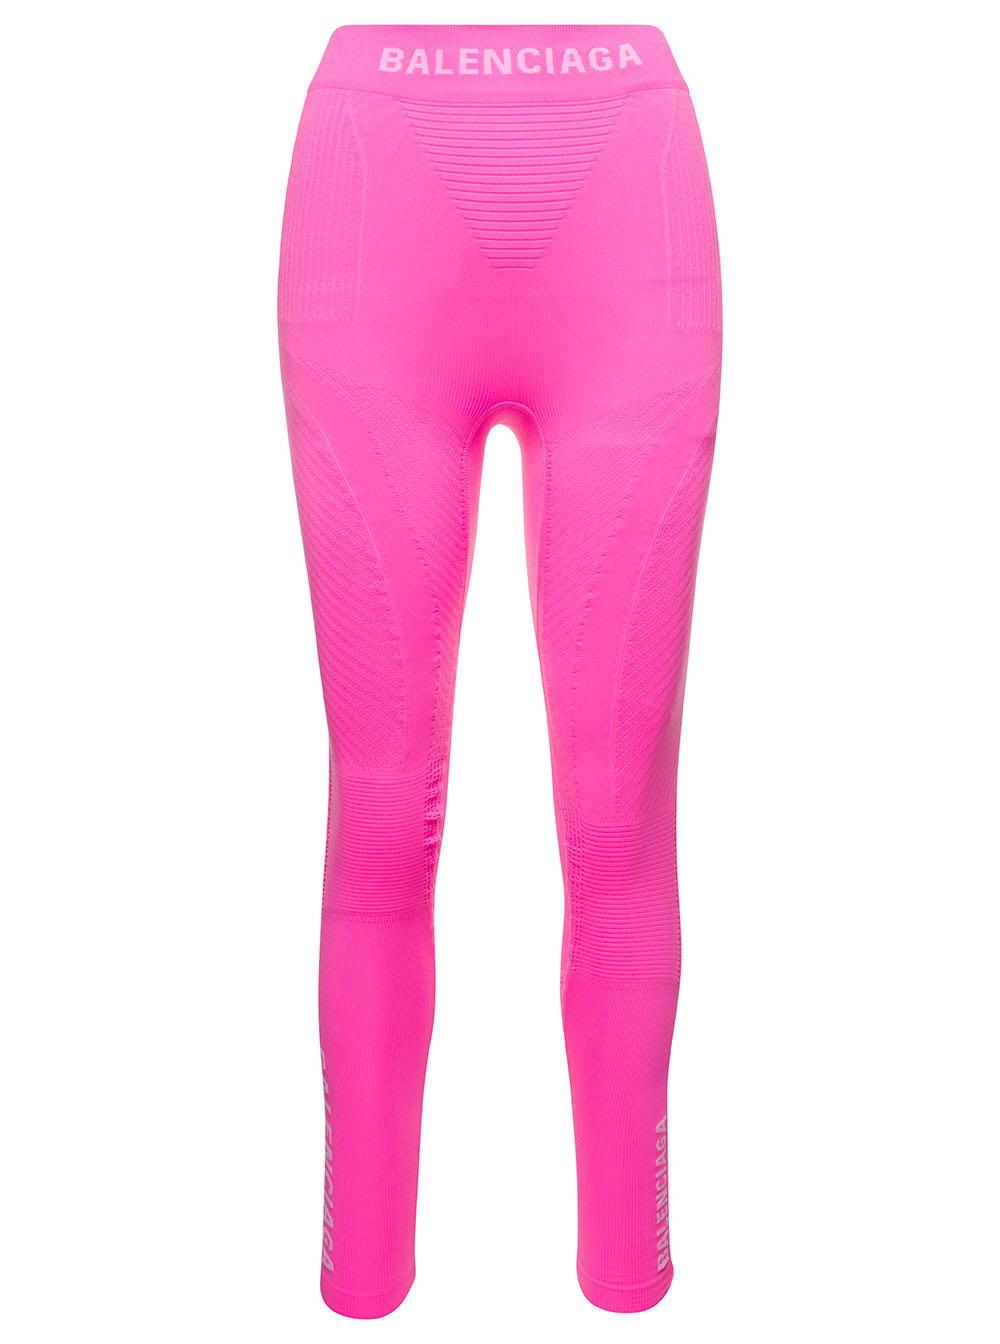 BALENCIAGA PINK ATHLETIC LEGGINGS WITH LOGO IN POLYAMMIDE STRETCH WOMAN